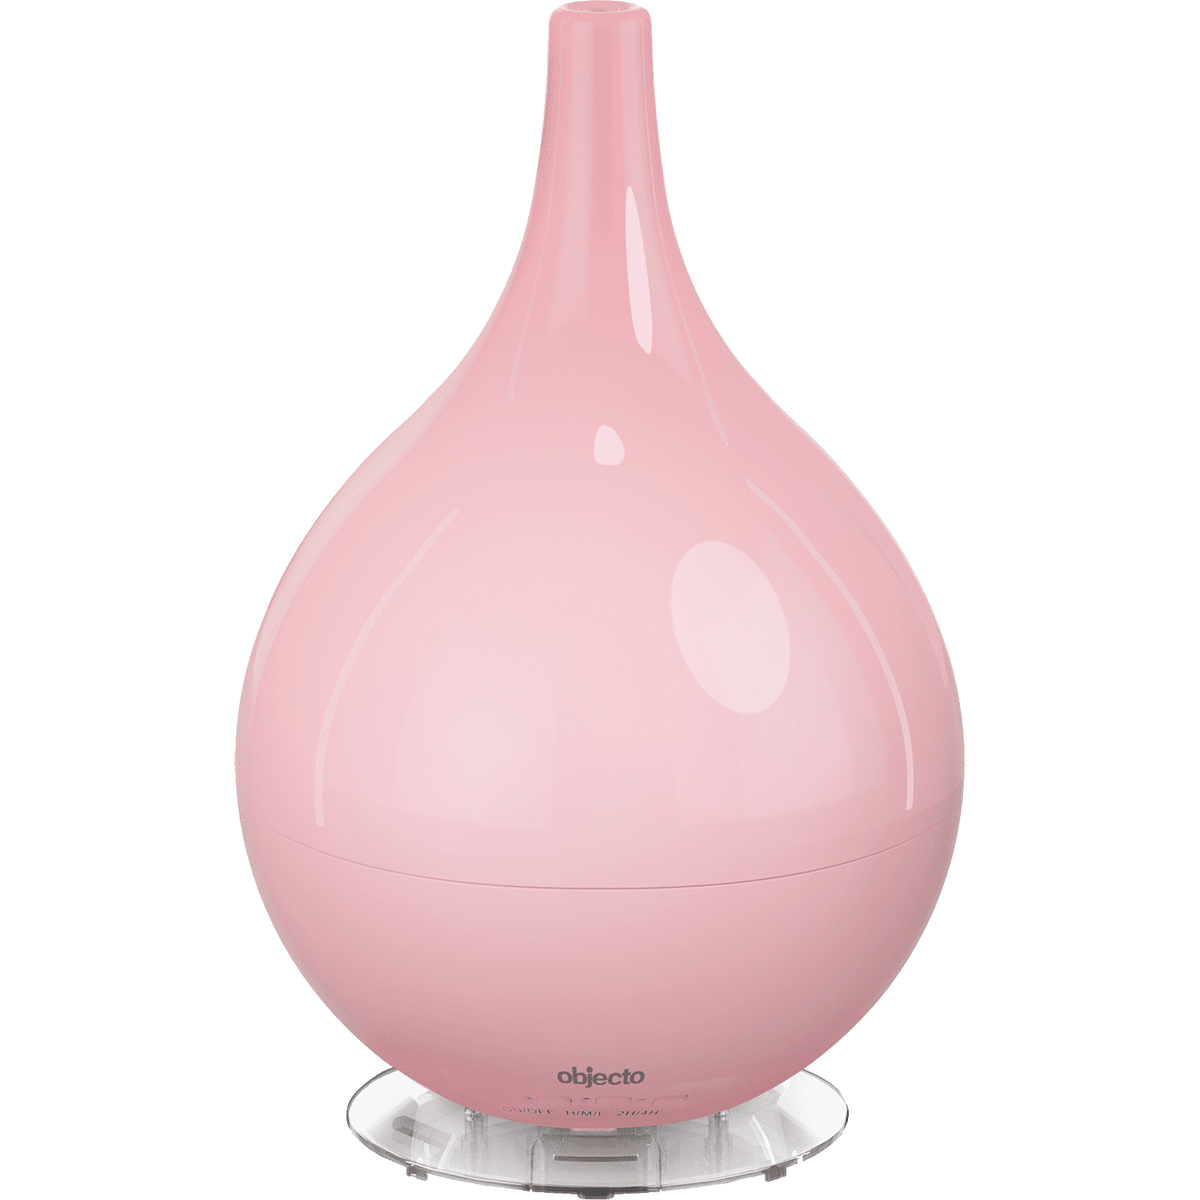 Objecto H3 Hybrid Humidifier - Pink